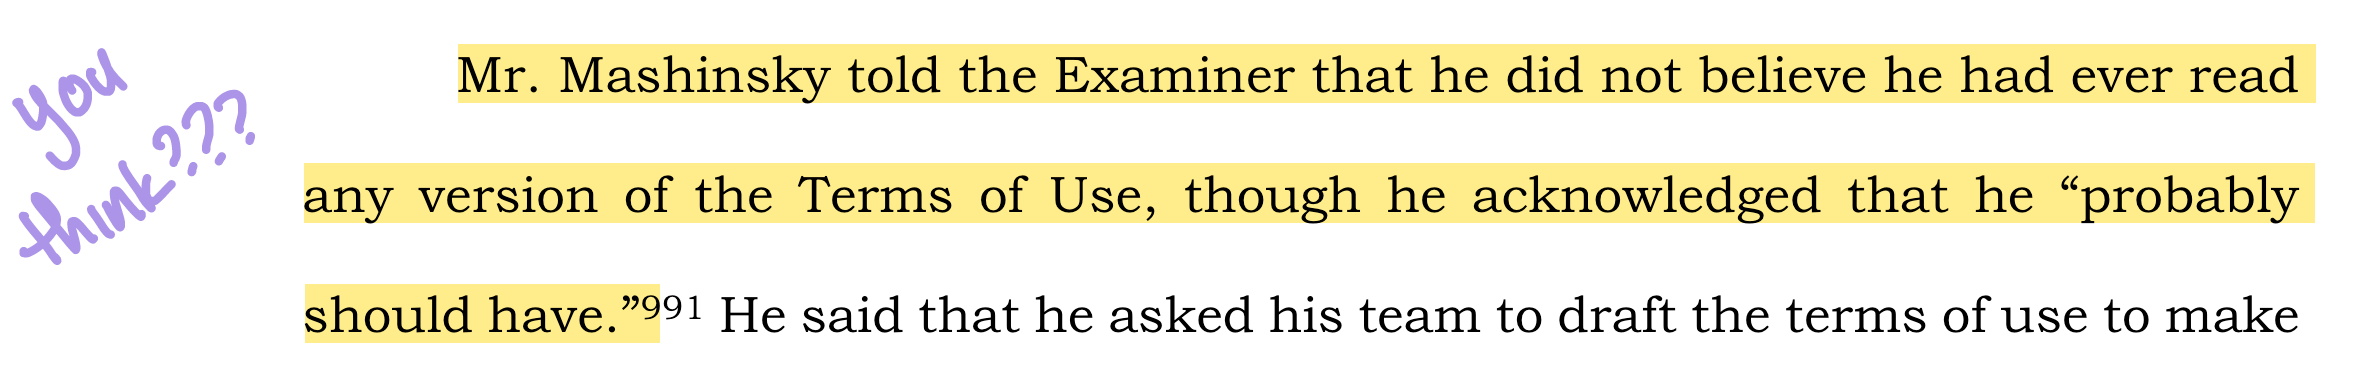 Highlighted text: "Mr. Mashinsky told the Examiner that he did not believe he had ever read any version of the Terms of Use, though he acknowledged that he 